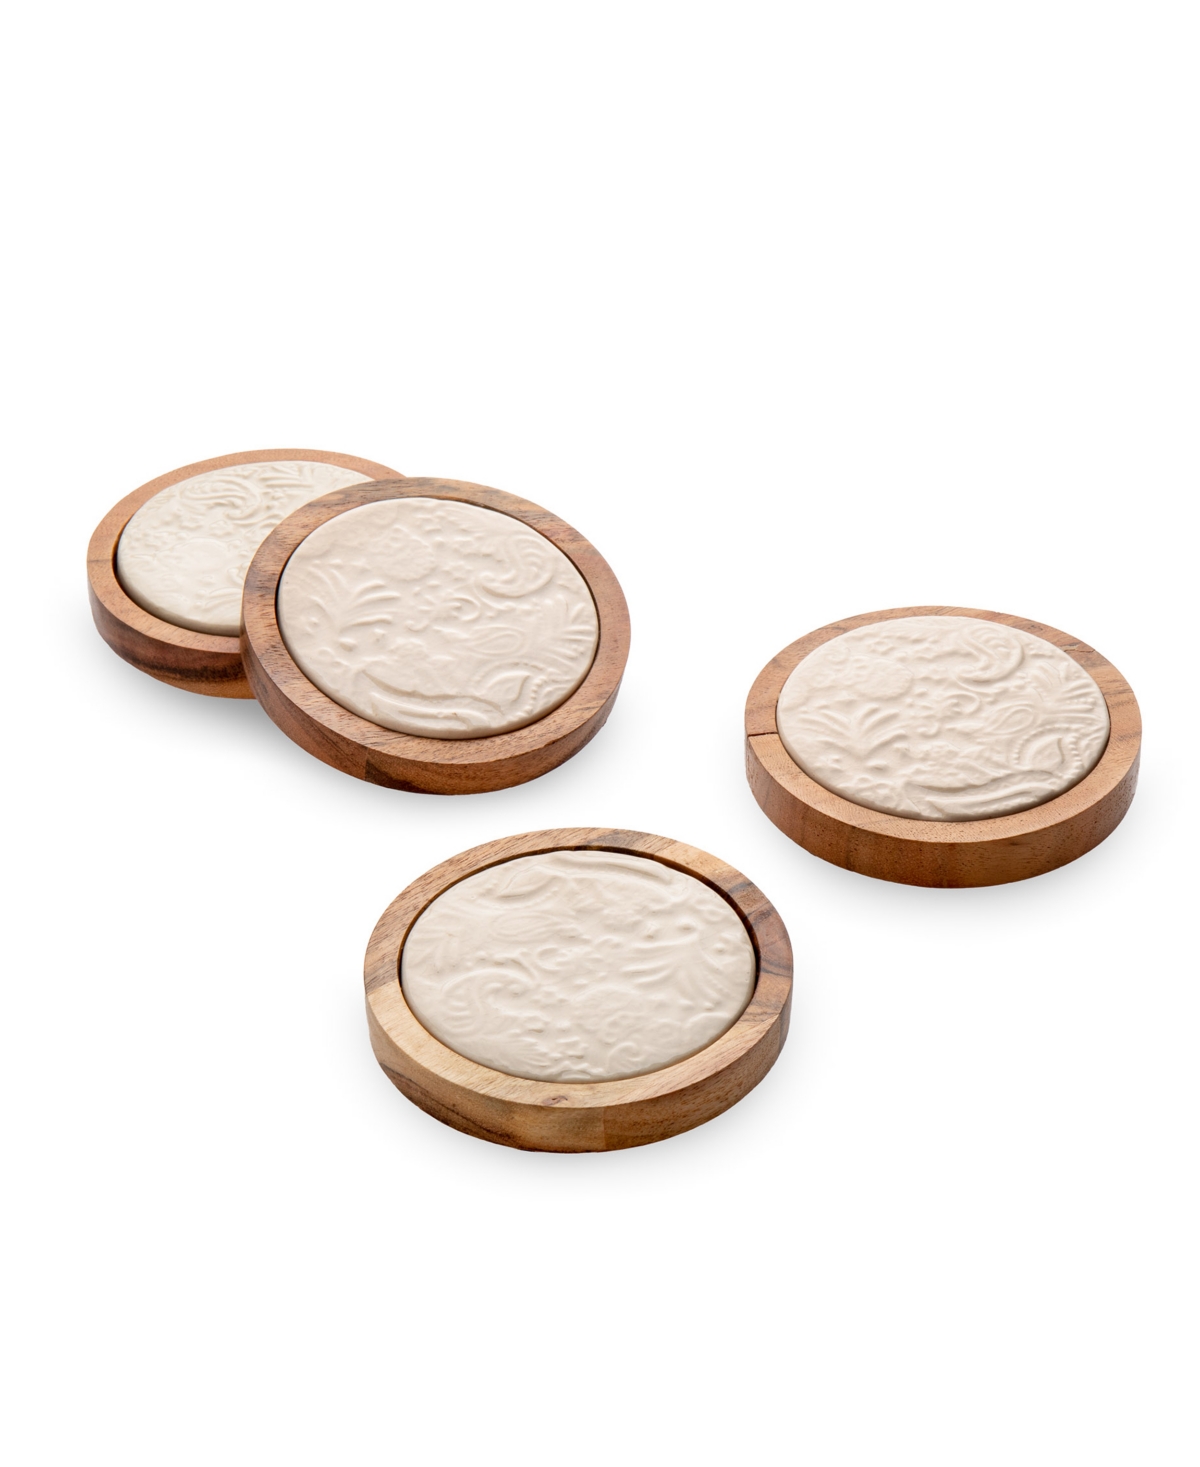 Shop Godinger Acacia Wood Coasters With Floral Designs In Porcelain On Coasters, Set Of 4 In White